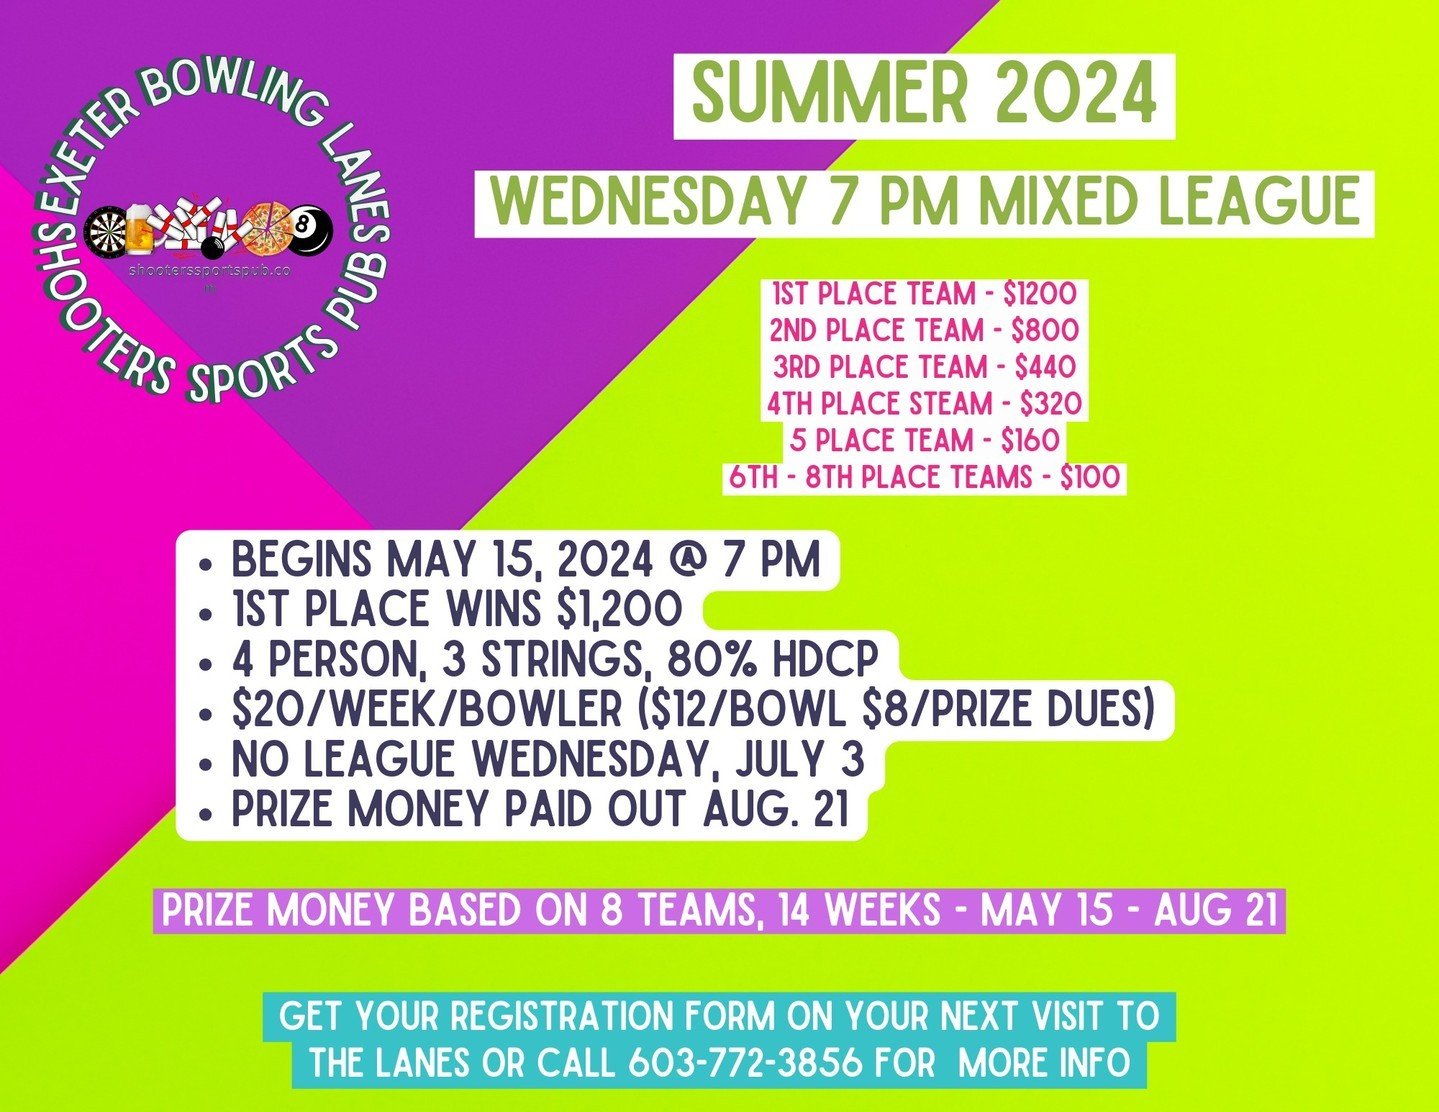 Who's ready to roll their way to $1200? 🎳💰 ⁠
⁠
Summer Mixed League starts 5/15, Wednesdays at 7 pm. Sign up, show up, bowl up! ⁠
⁠
#SummerLeague #BowlingNights⁠